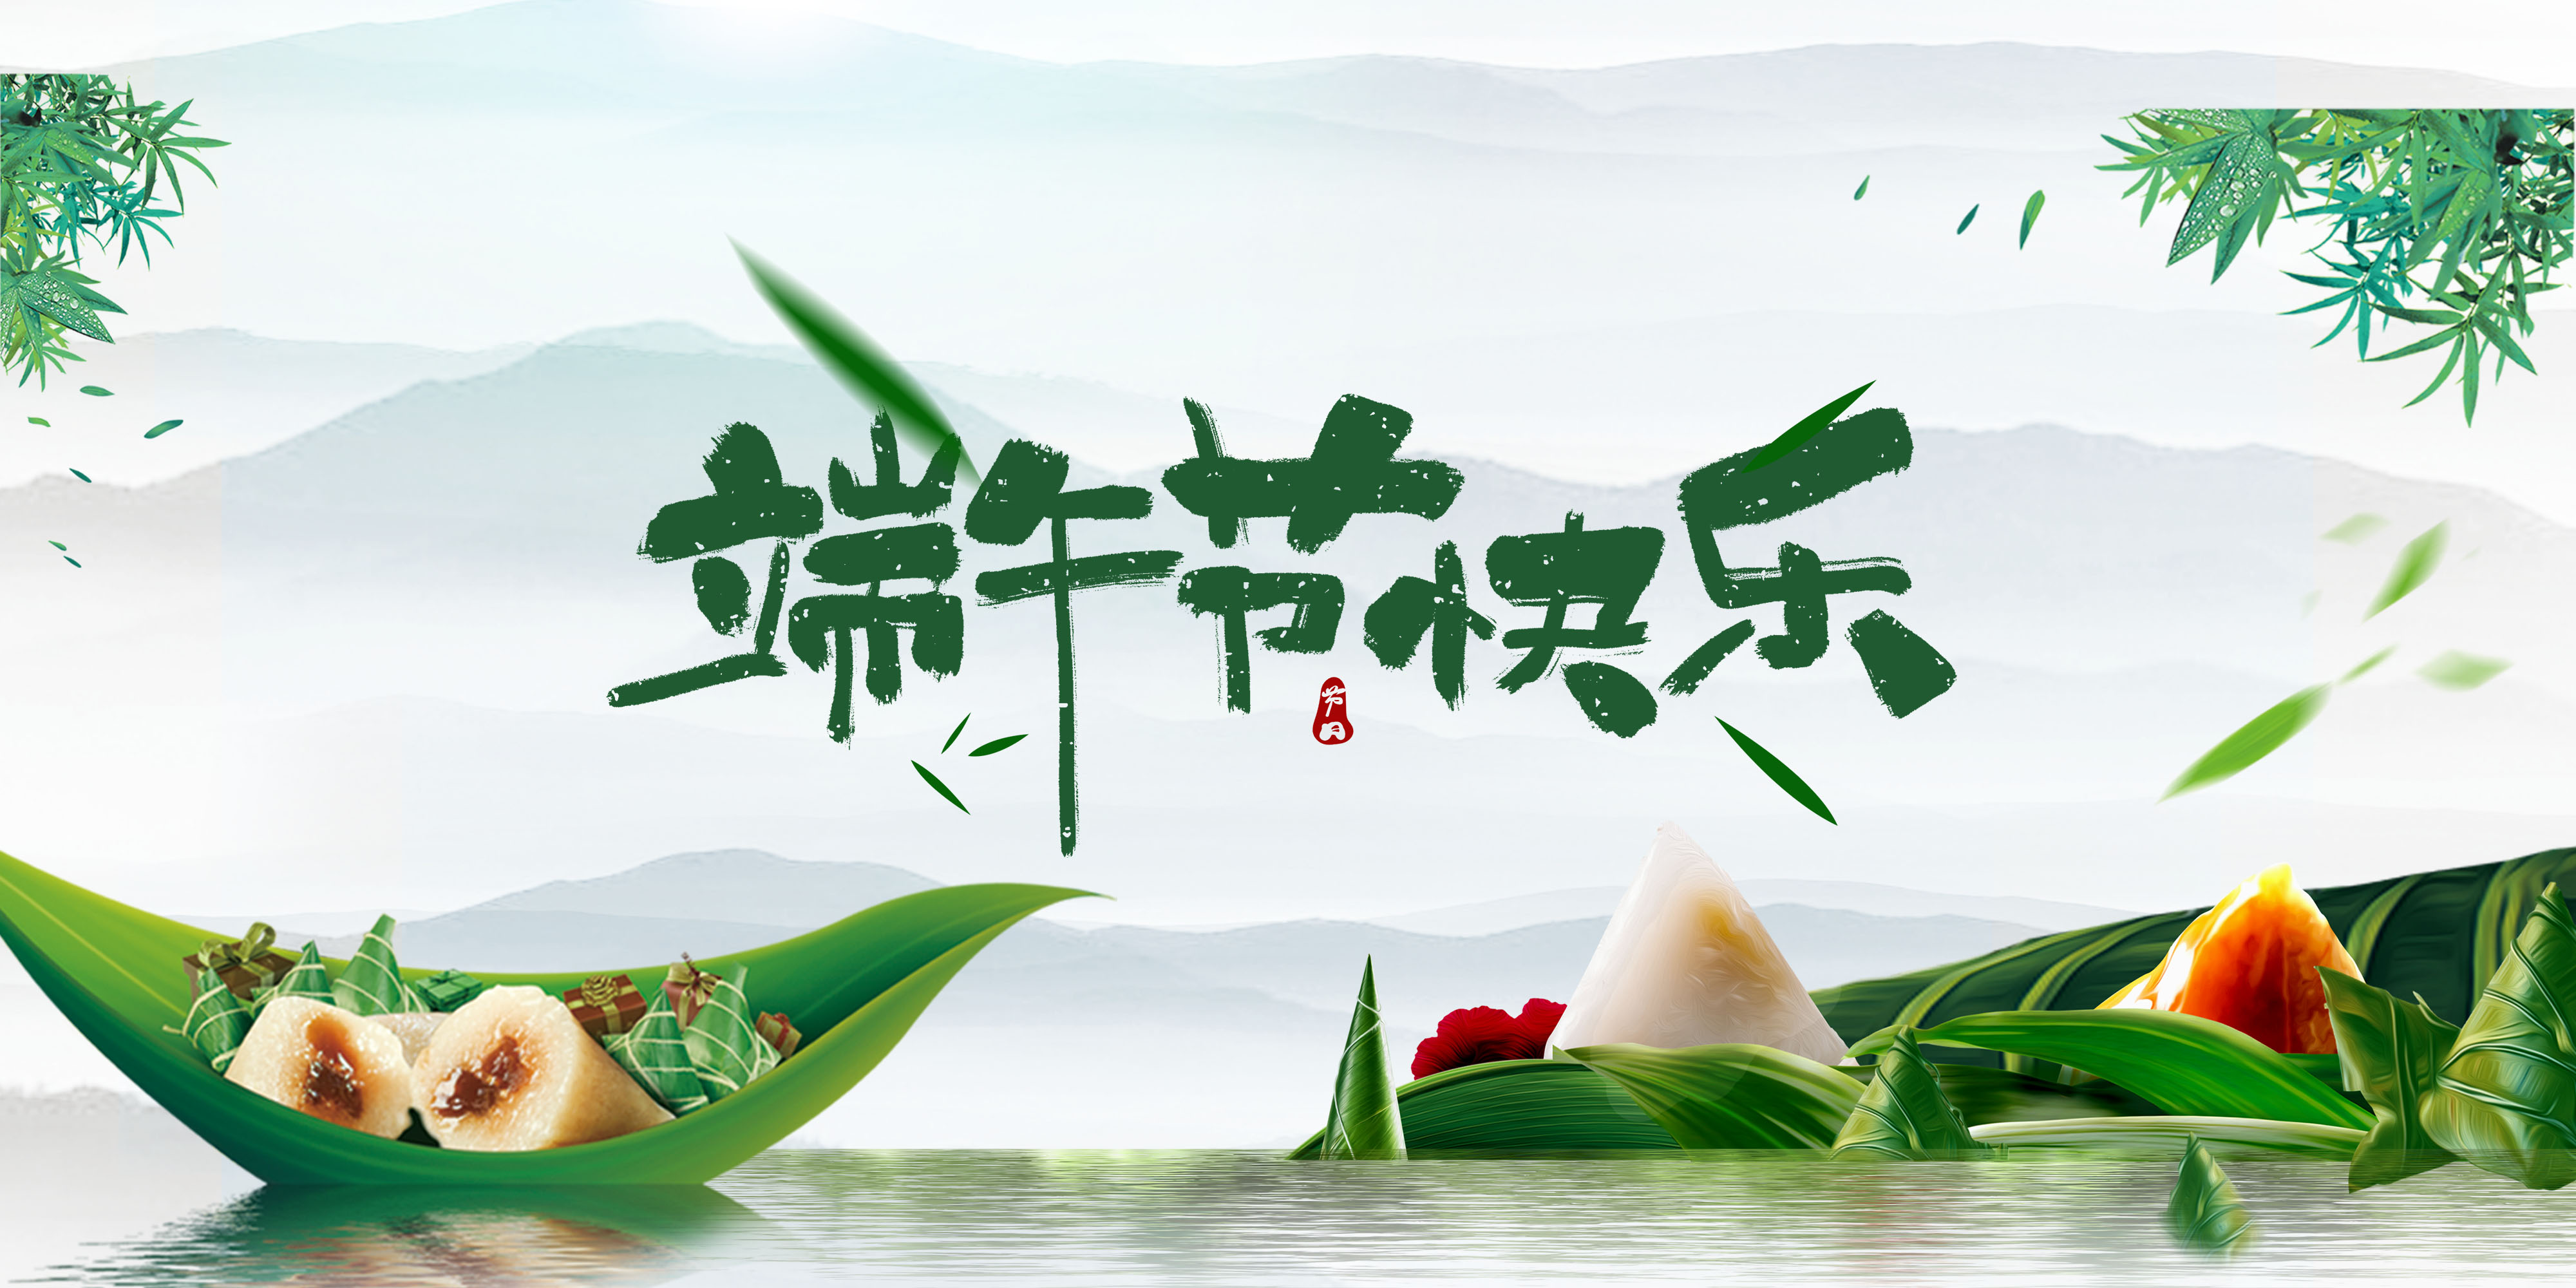 Strong love for the Dragon Boat Festival, joy of rice dumplings, and great employee benefits